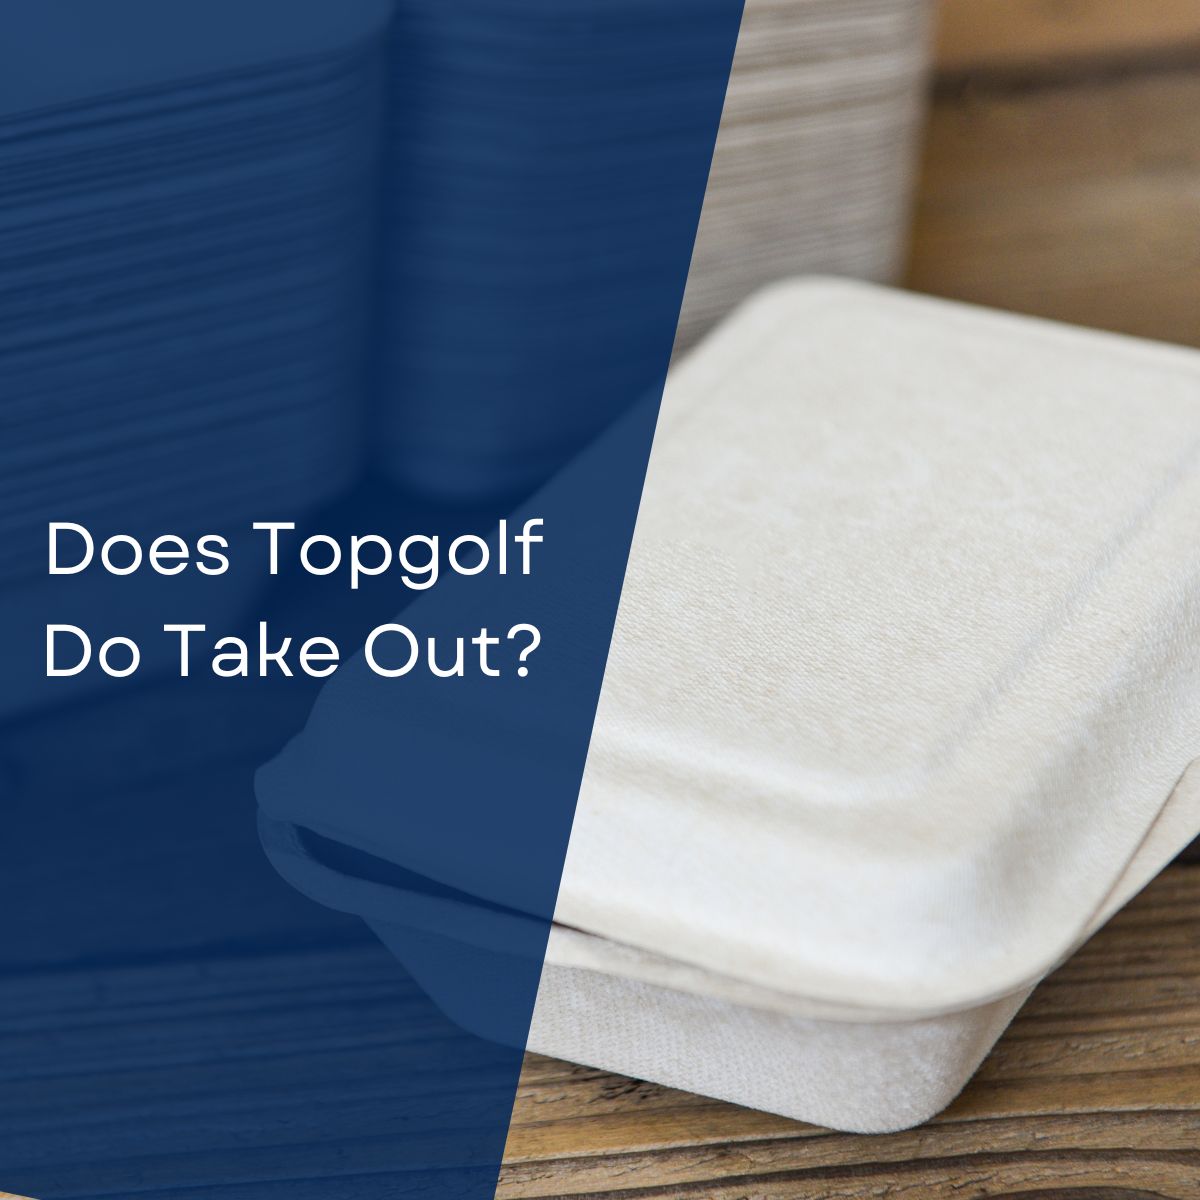 Does Topgolf Do Take Out?